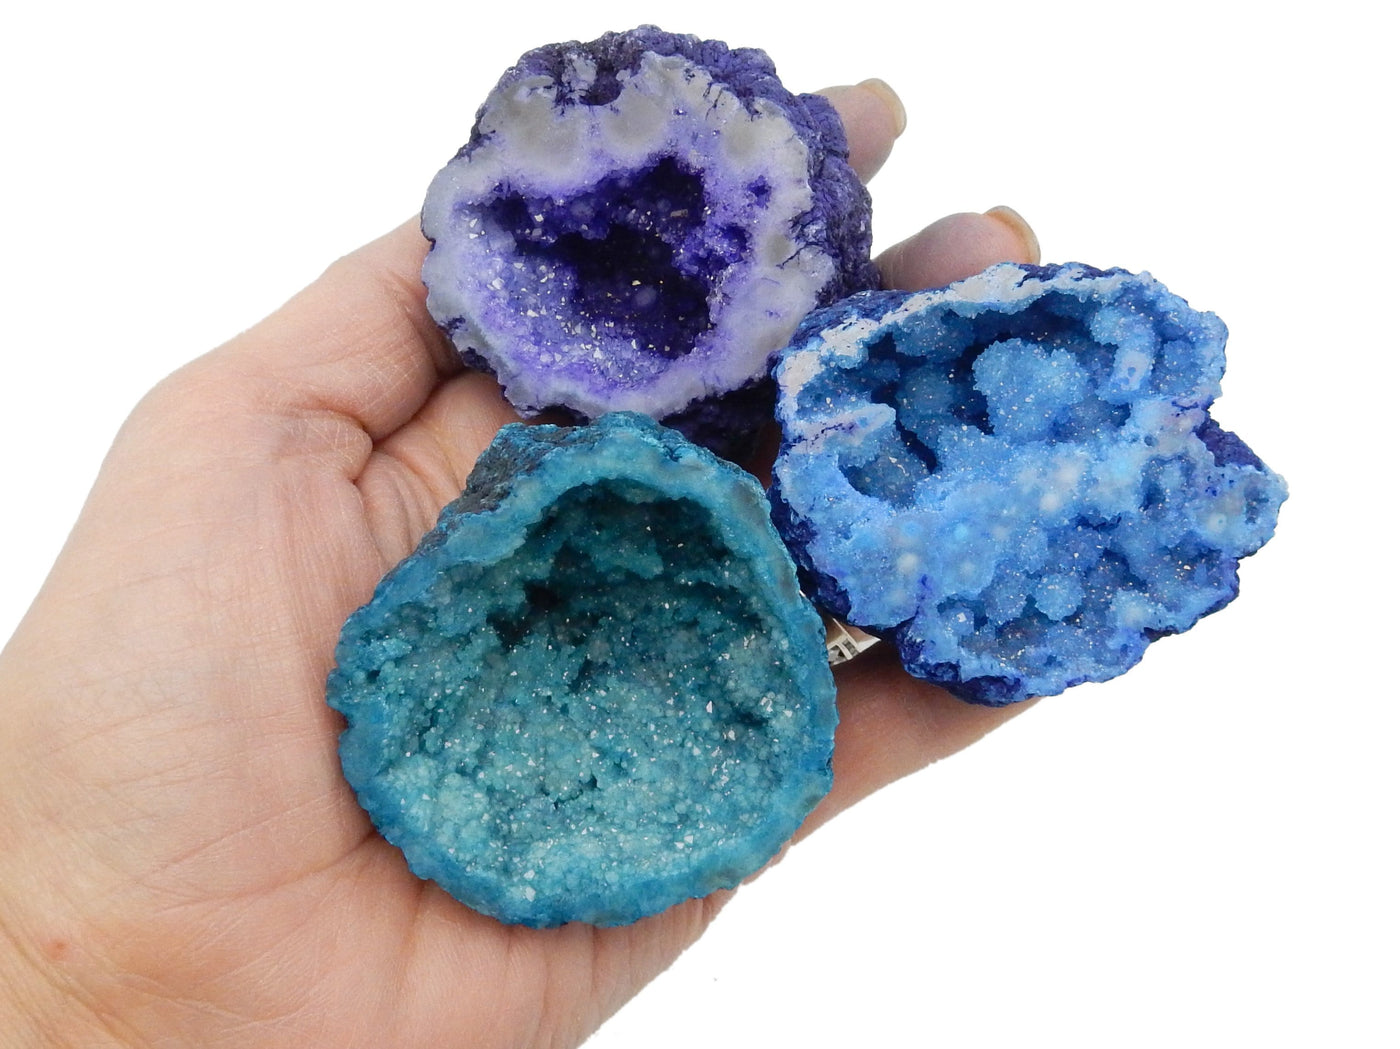 3  Large Geode Halves in a hand for size reference, in purple, blue and teal